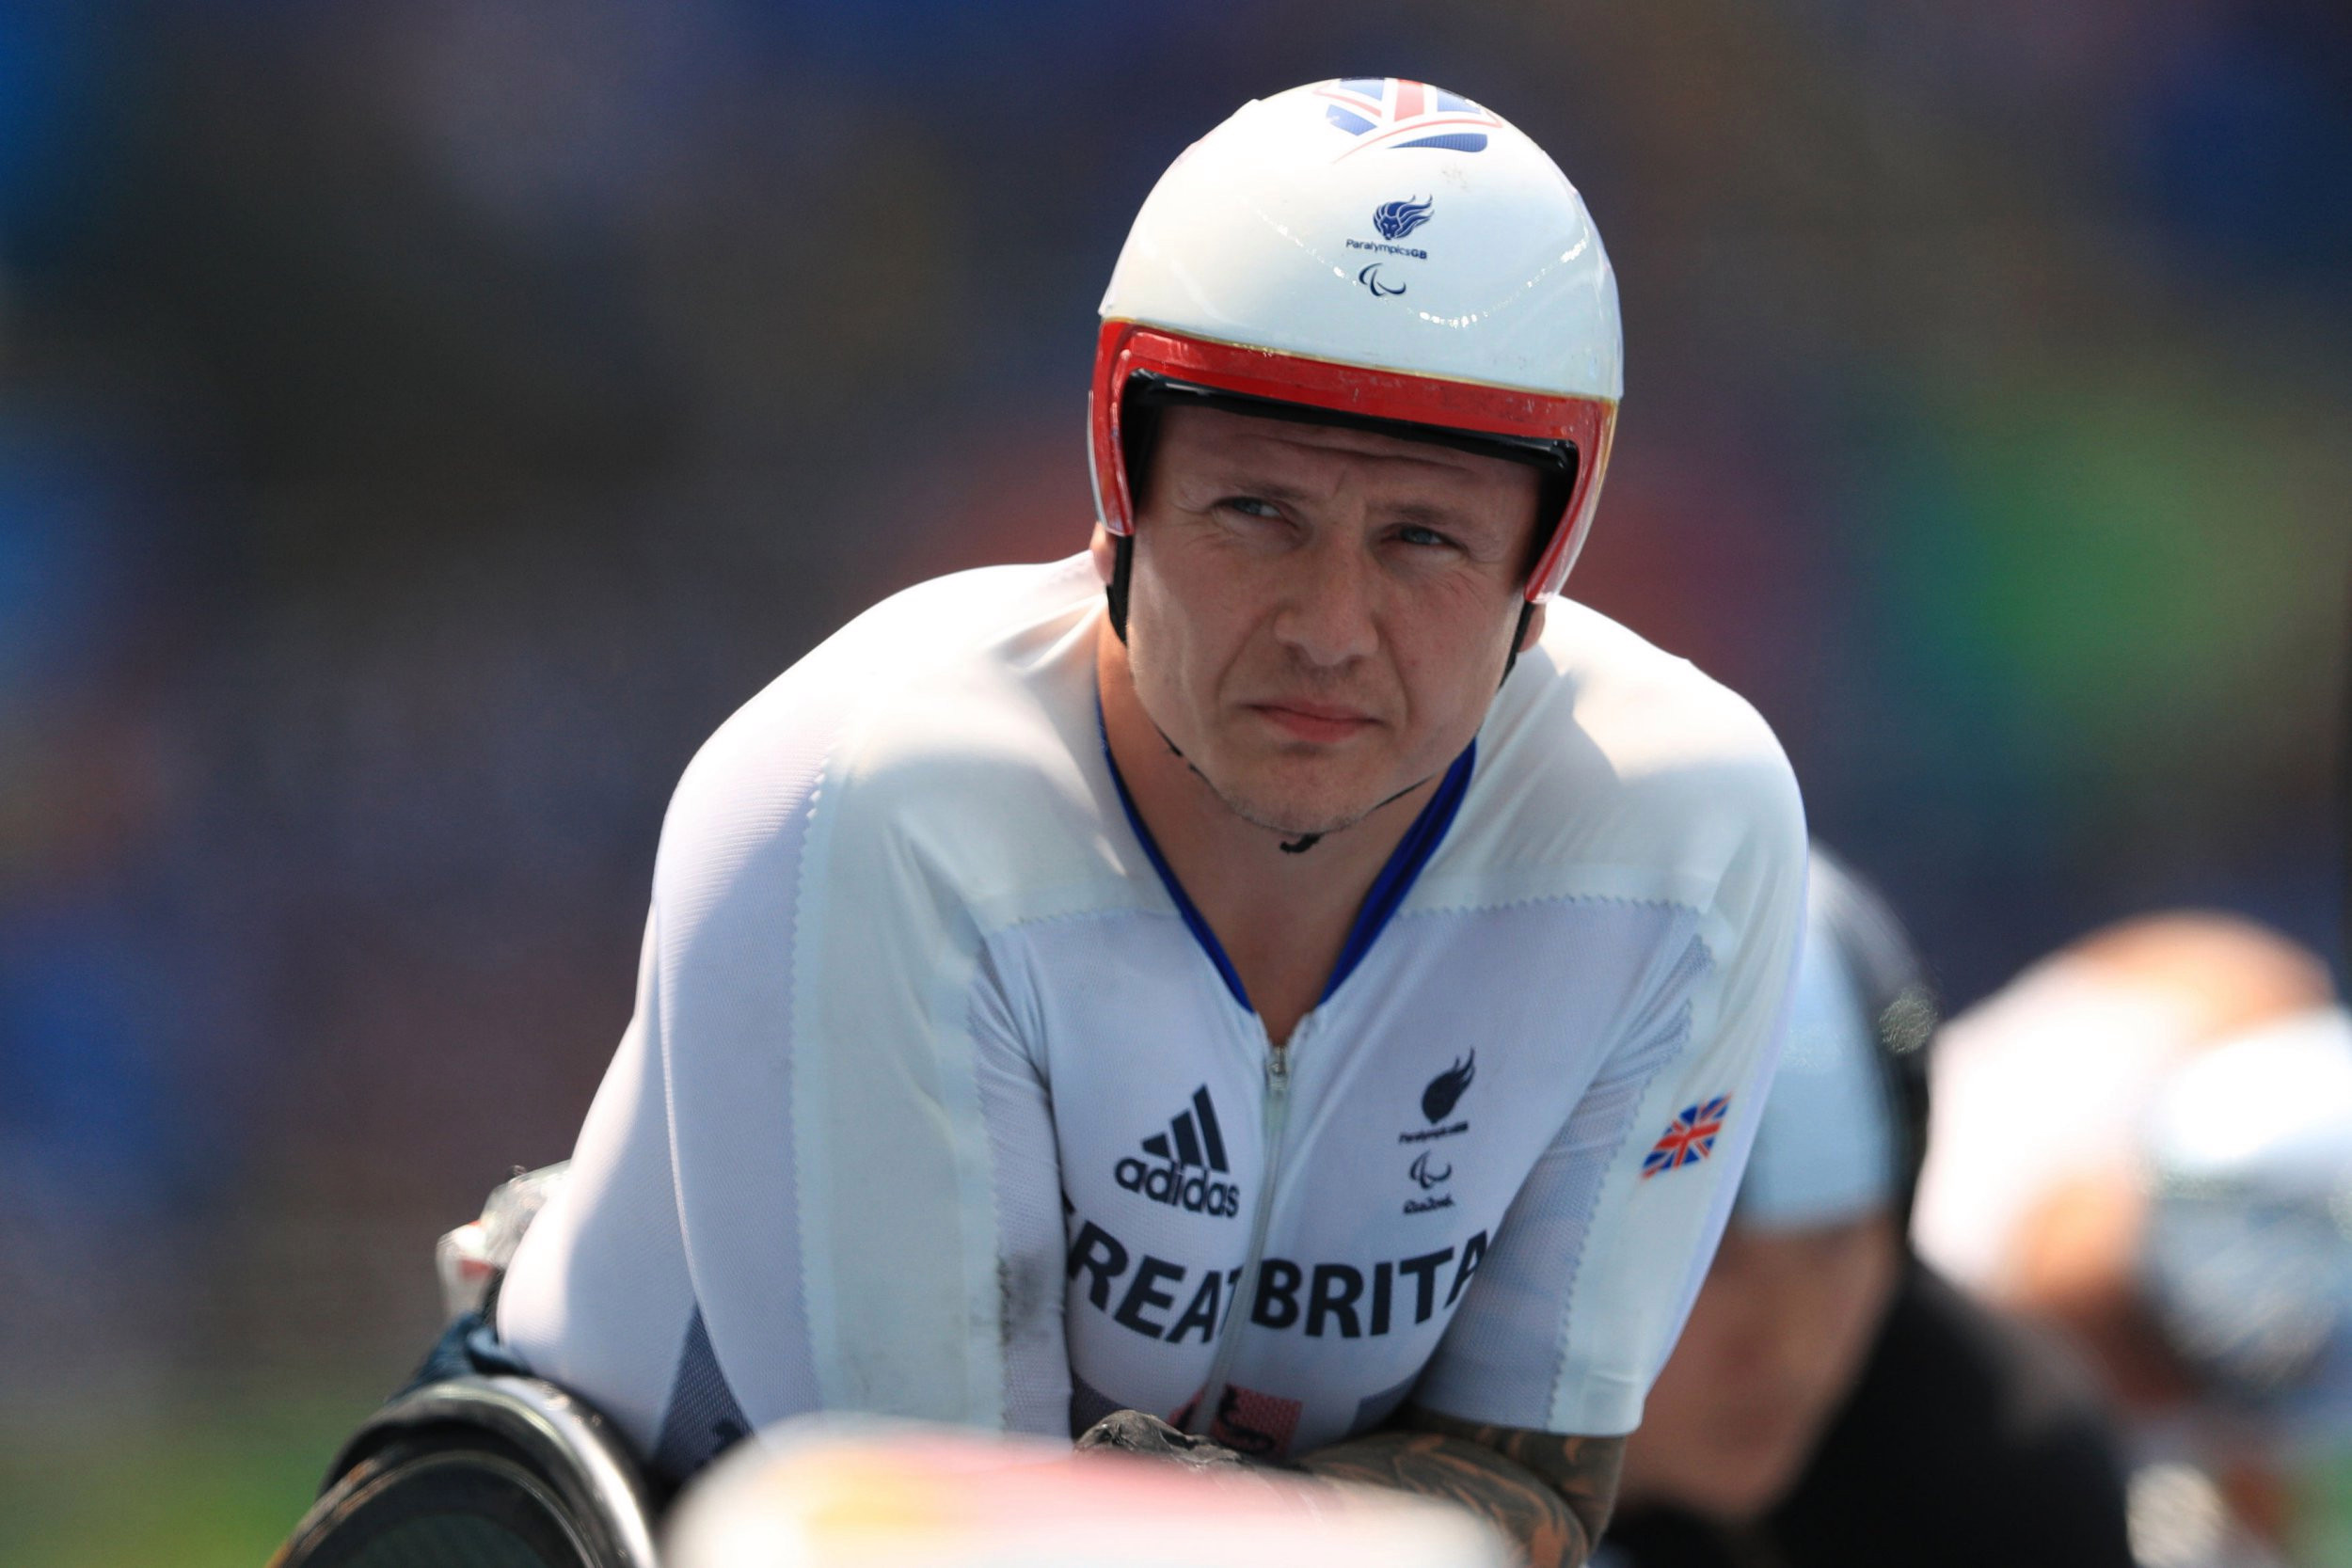 Team GB Paralympics legend David Weir: ‘I feel a lot calmer and less angry at 42’